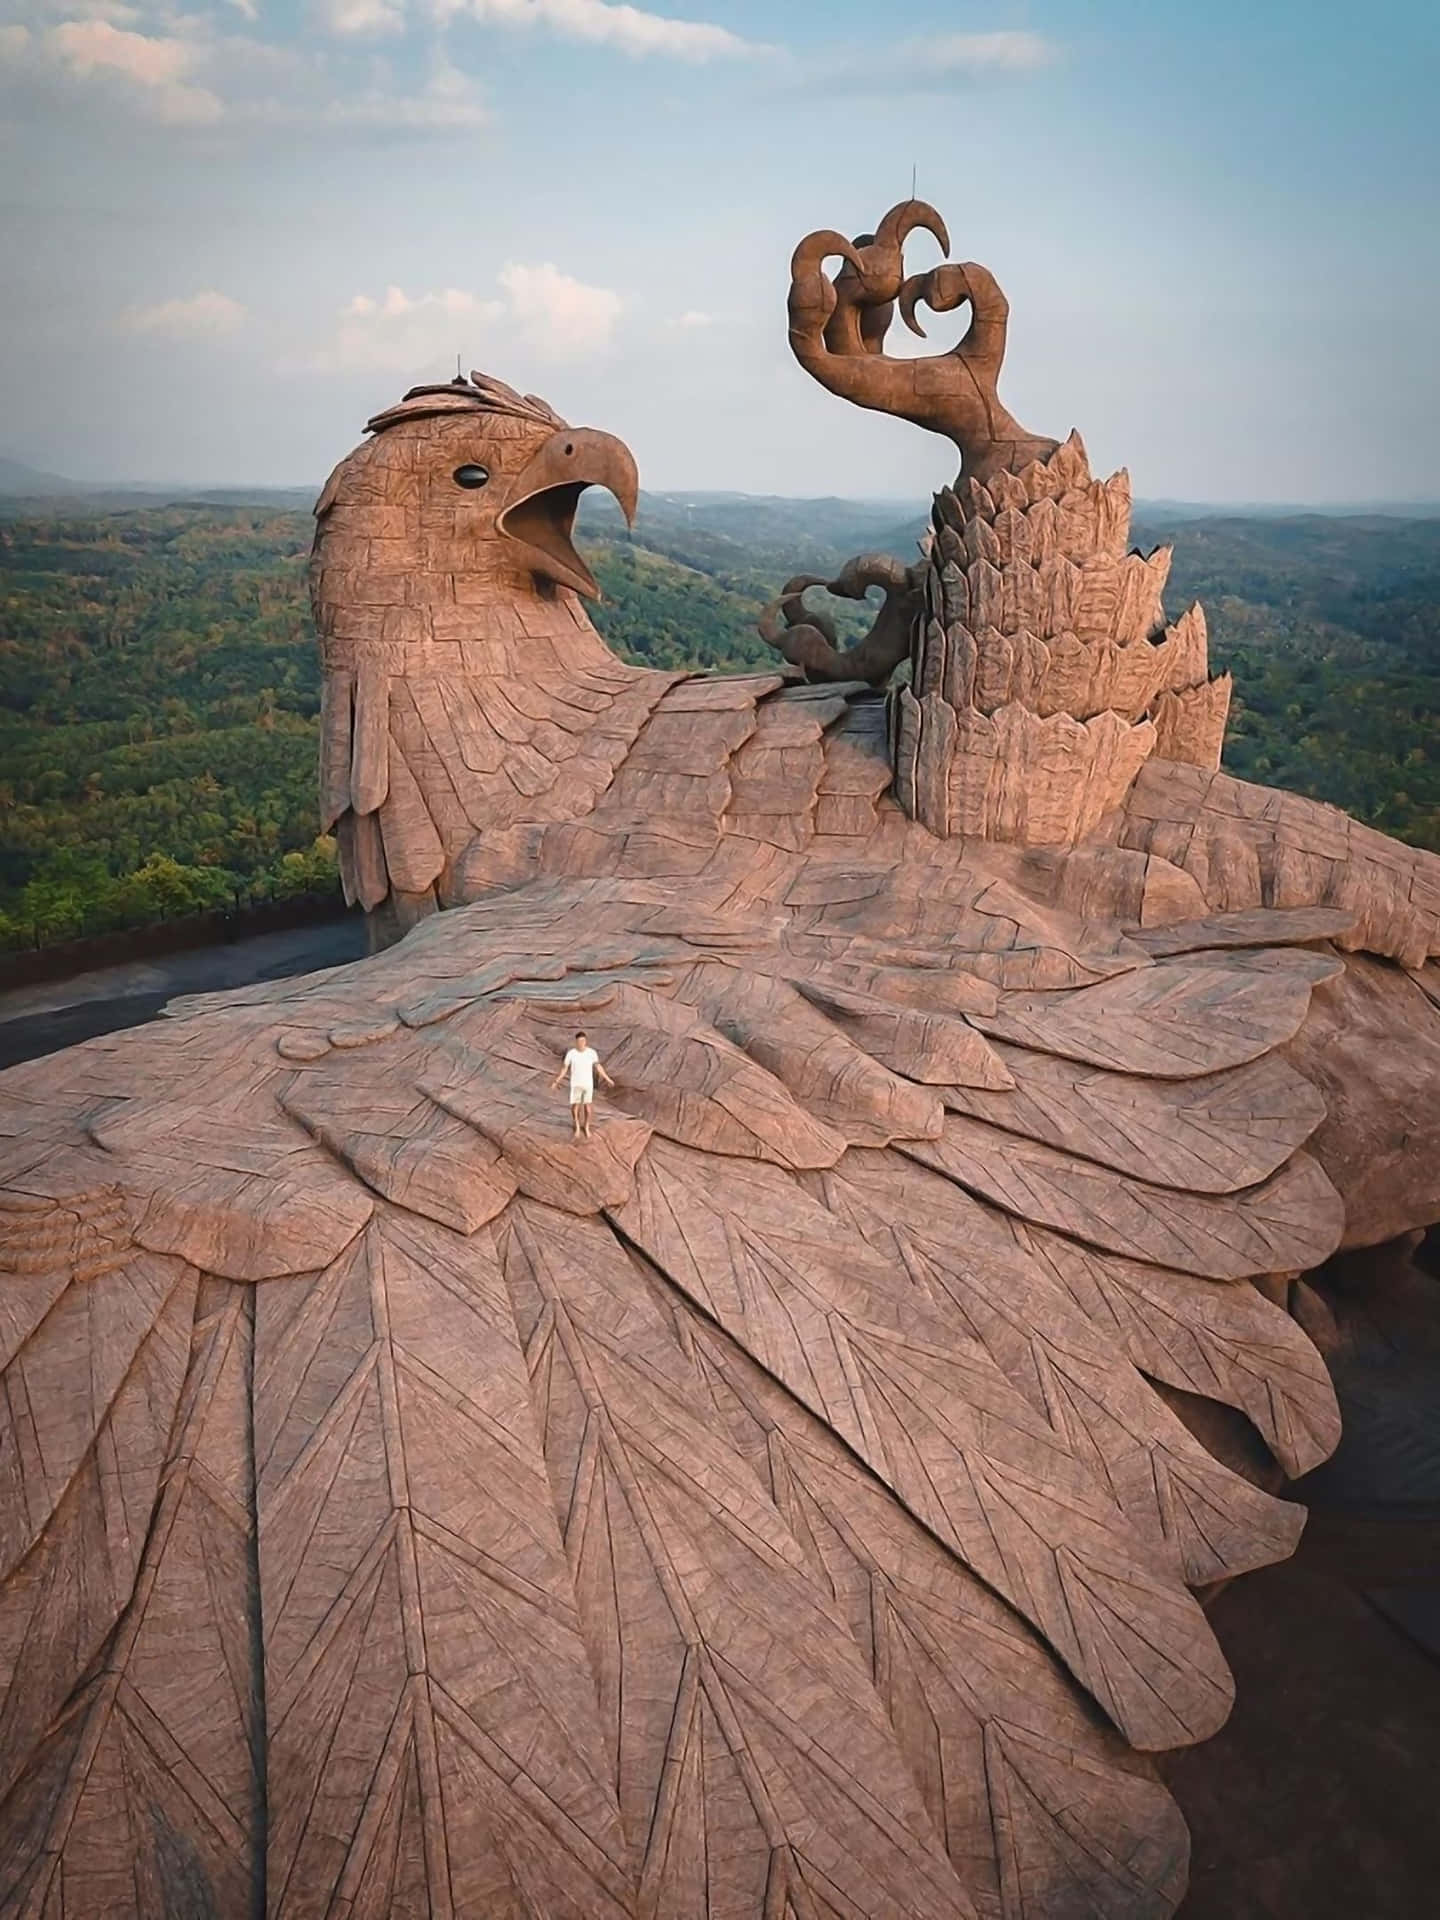 A Large Statue Of An Eagle On Top Of A Mountain Wallpaper